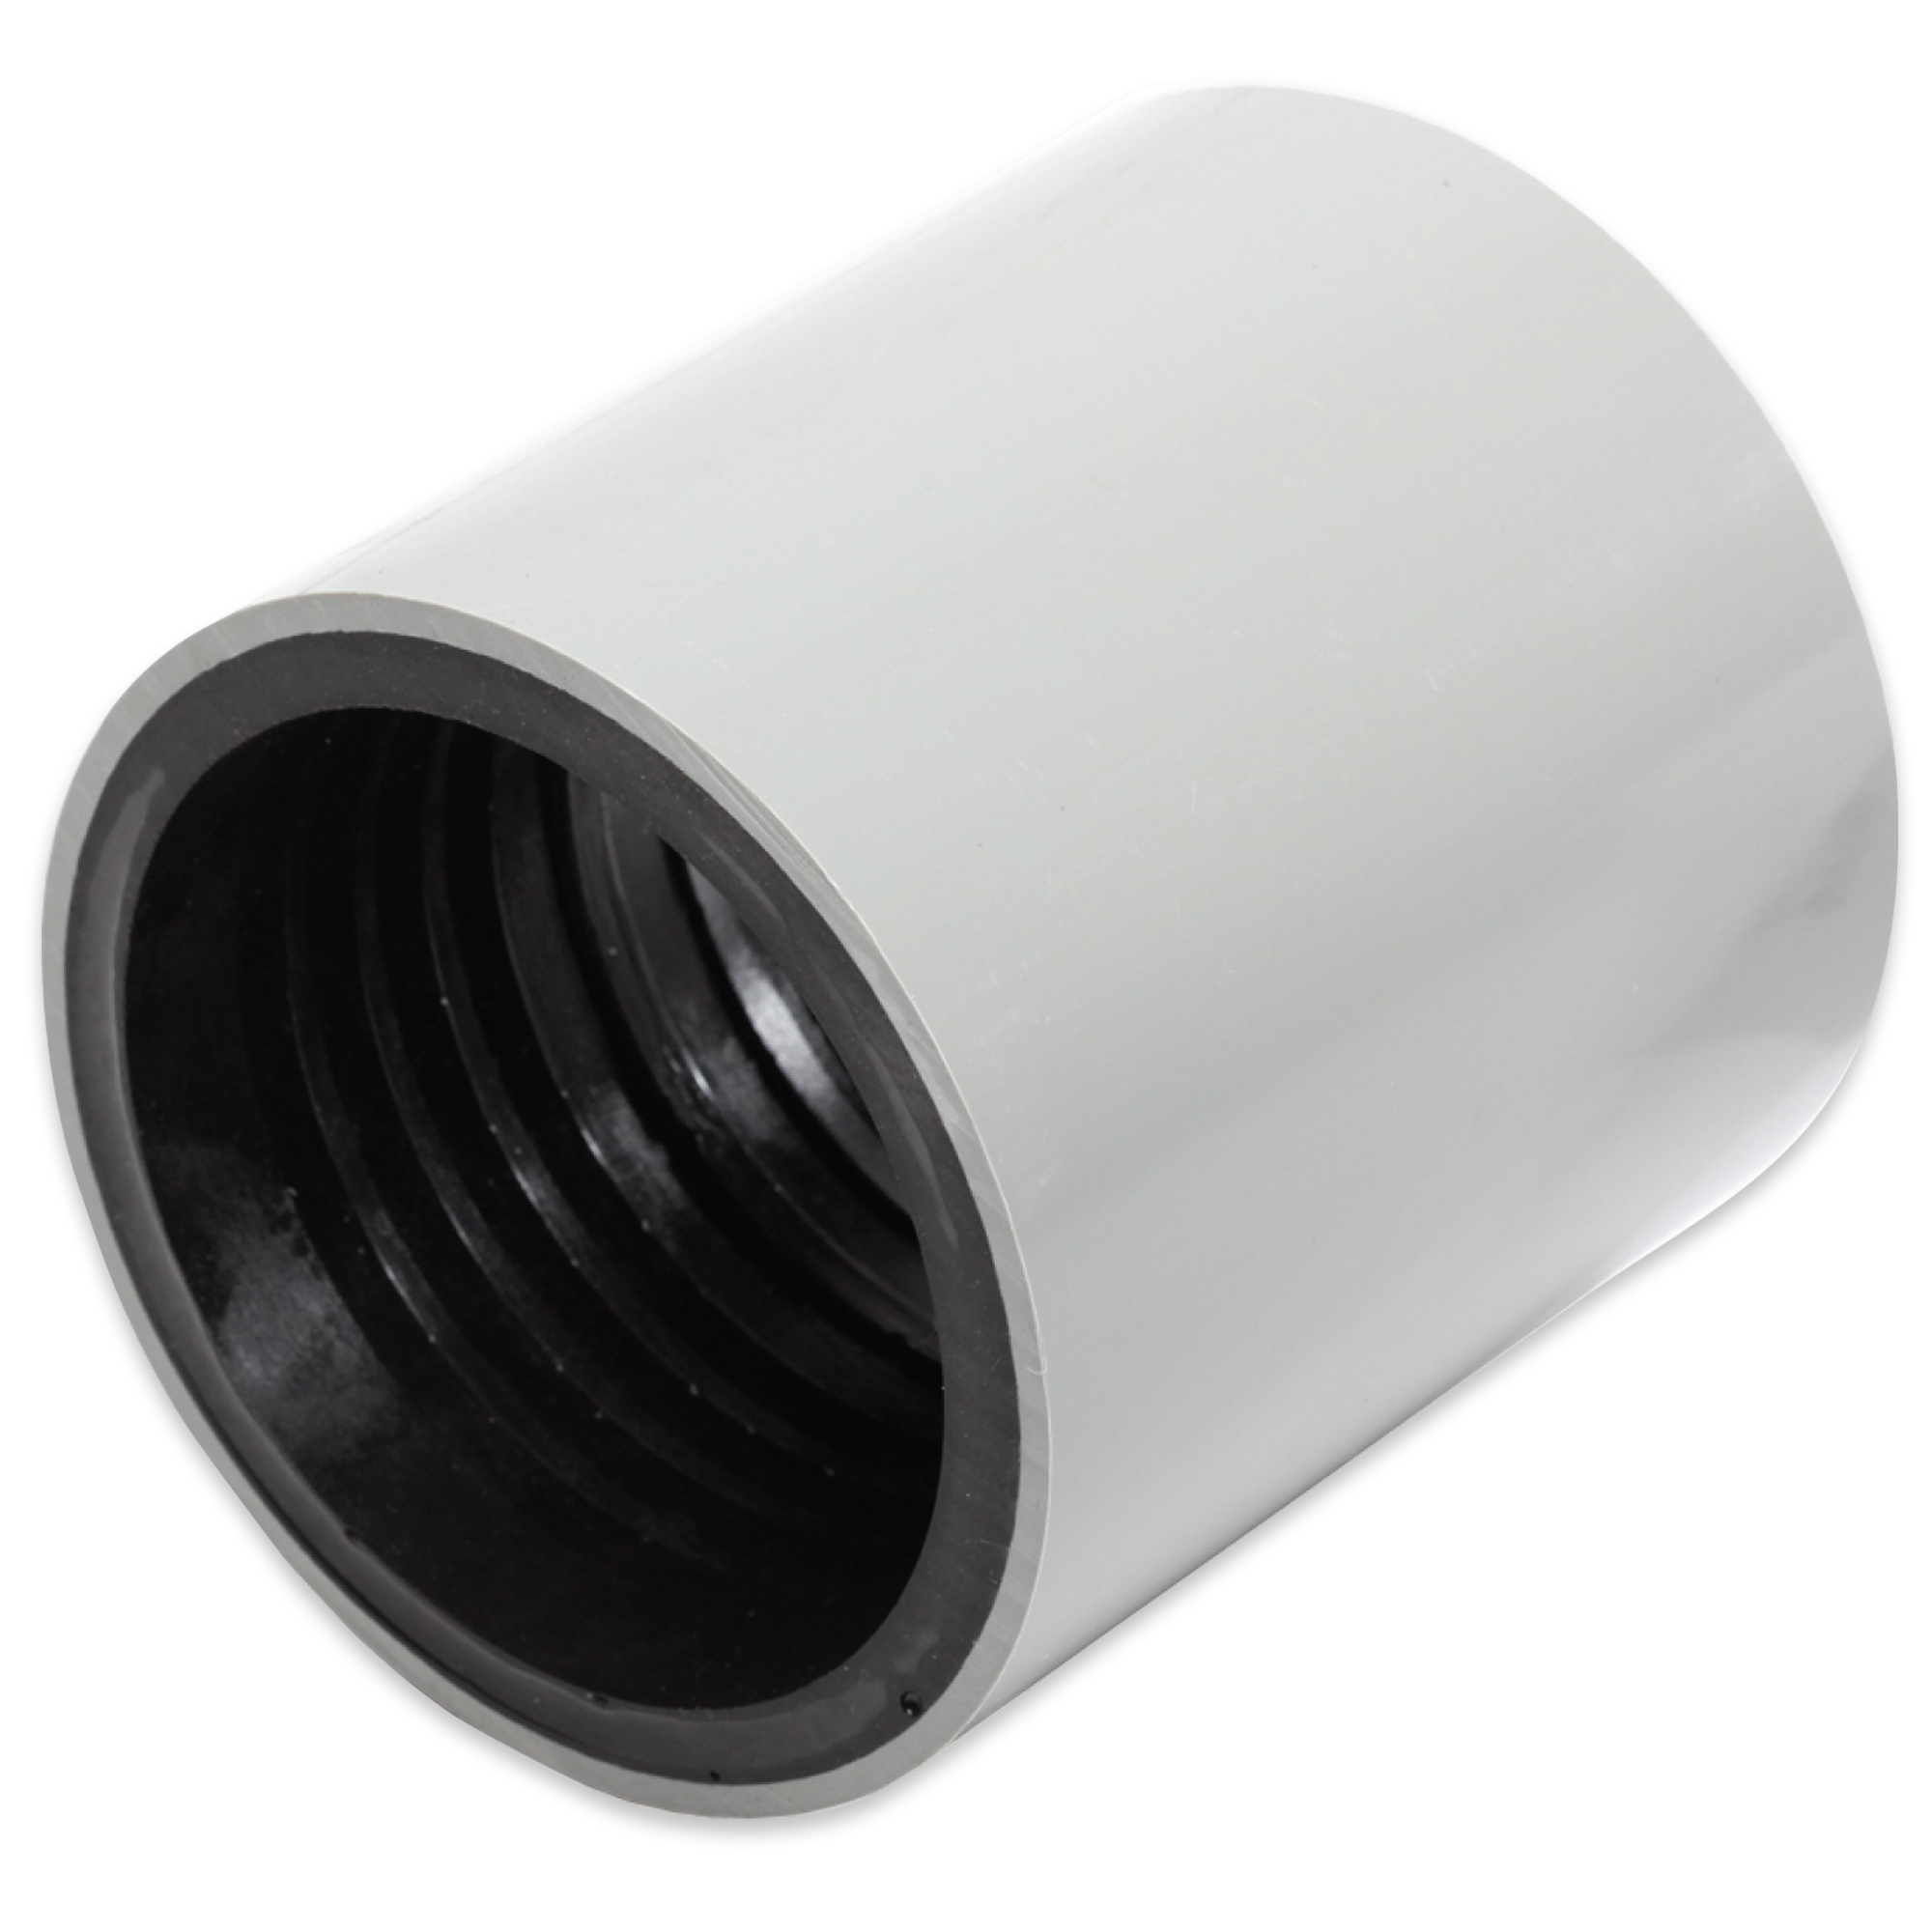 A low-cost push-on coupler with a molded rubber gripping insert. Can be used on HDPE, PVC, Fiberglass (FRE), and metal conduit. Transition couplers are used to join ducts with different outside diameters.